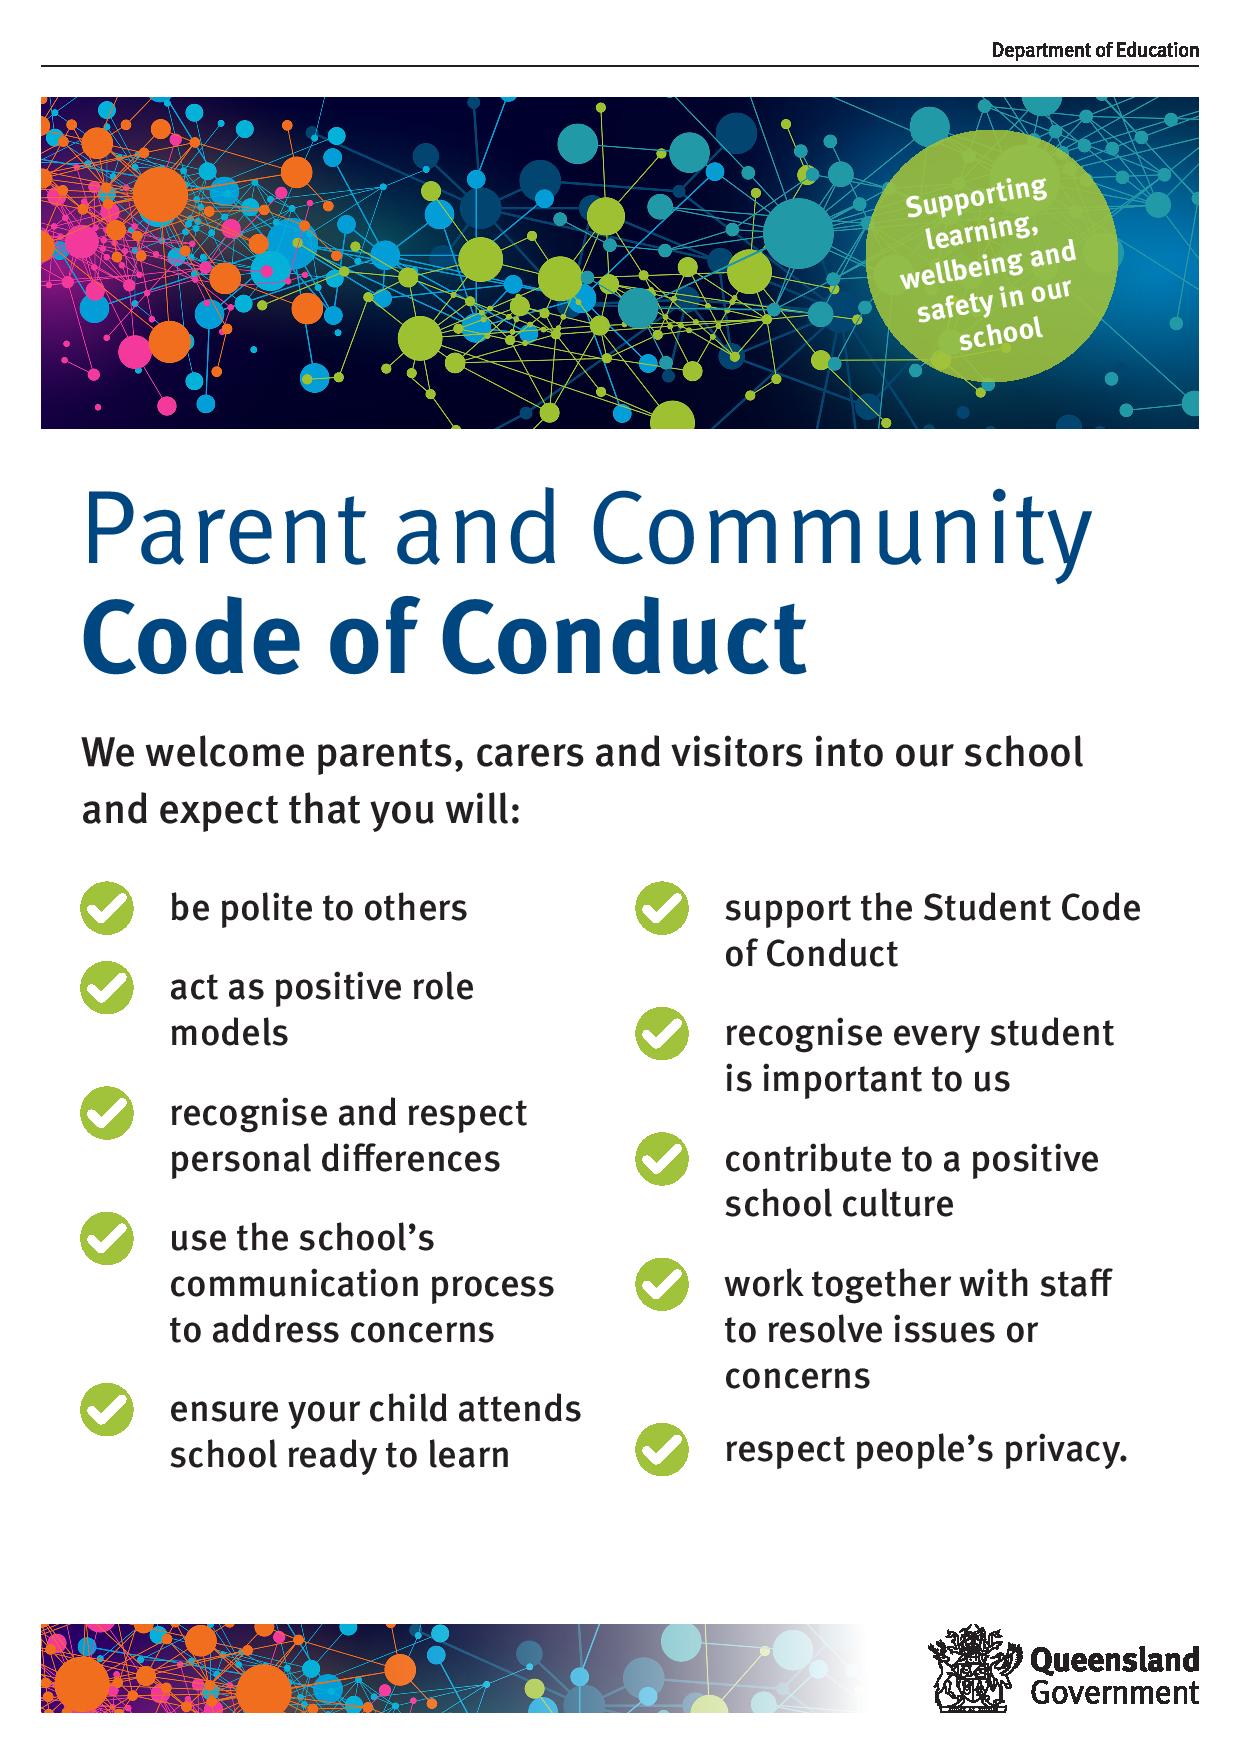 Parent_and_community_code_of_conduct_poster-page-001.jpg